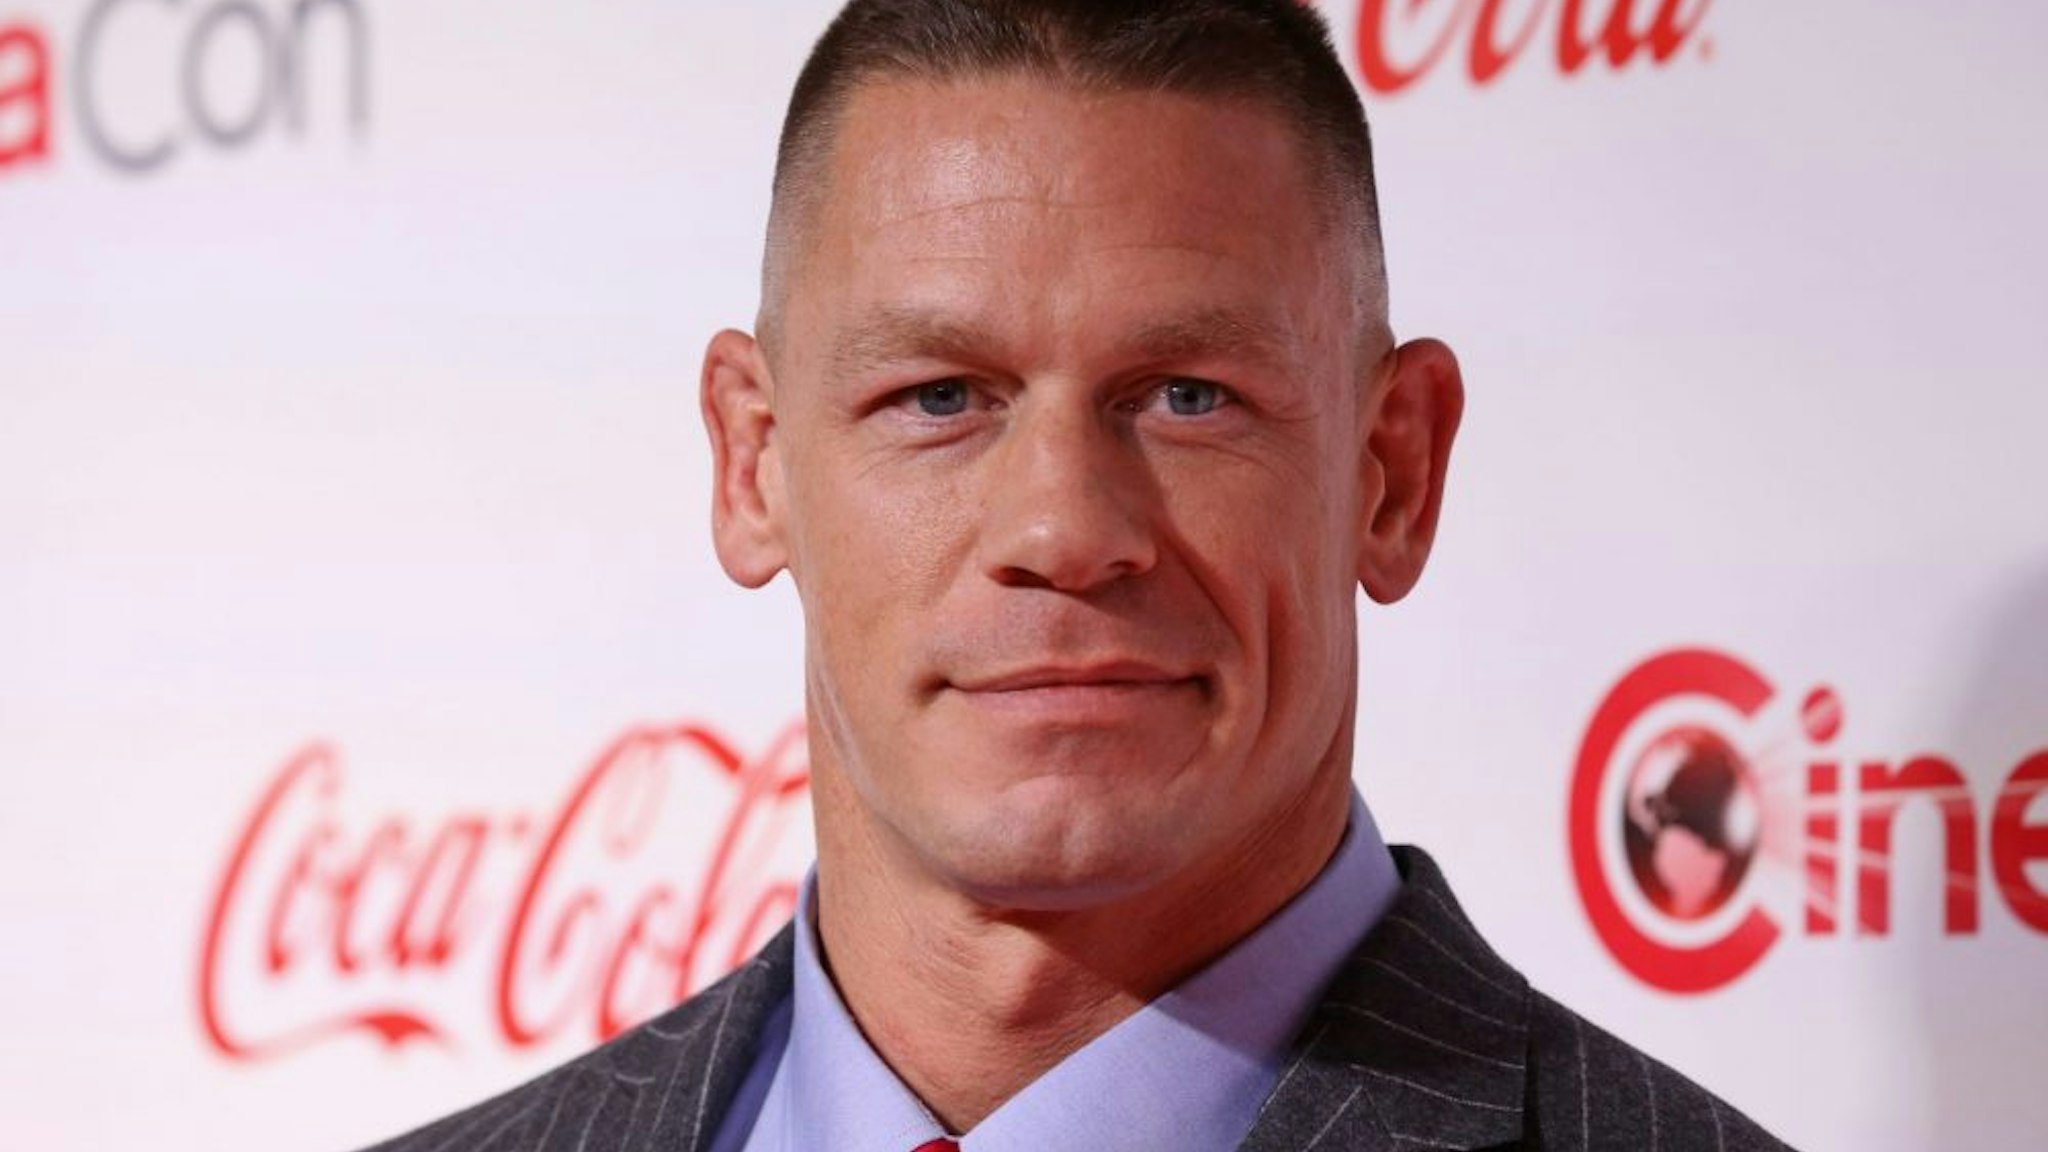 LAS VEGAS, NV - MARCH 30: Professional wrestler and actor John Cena, recipient of the Action Star of the Year Award, attends the CinemaCon Big Screen Achievement Awards at Omnia Nightclub at Caesars Palace during CinemaCon, the official convention of the National Association of Theatre Owners, on March 30, 2017 in Las Vegas, Nevada.